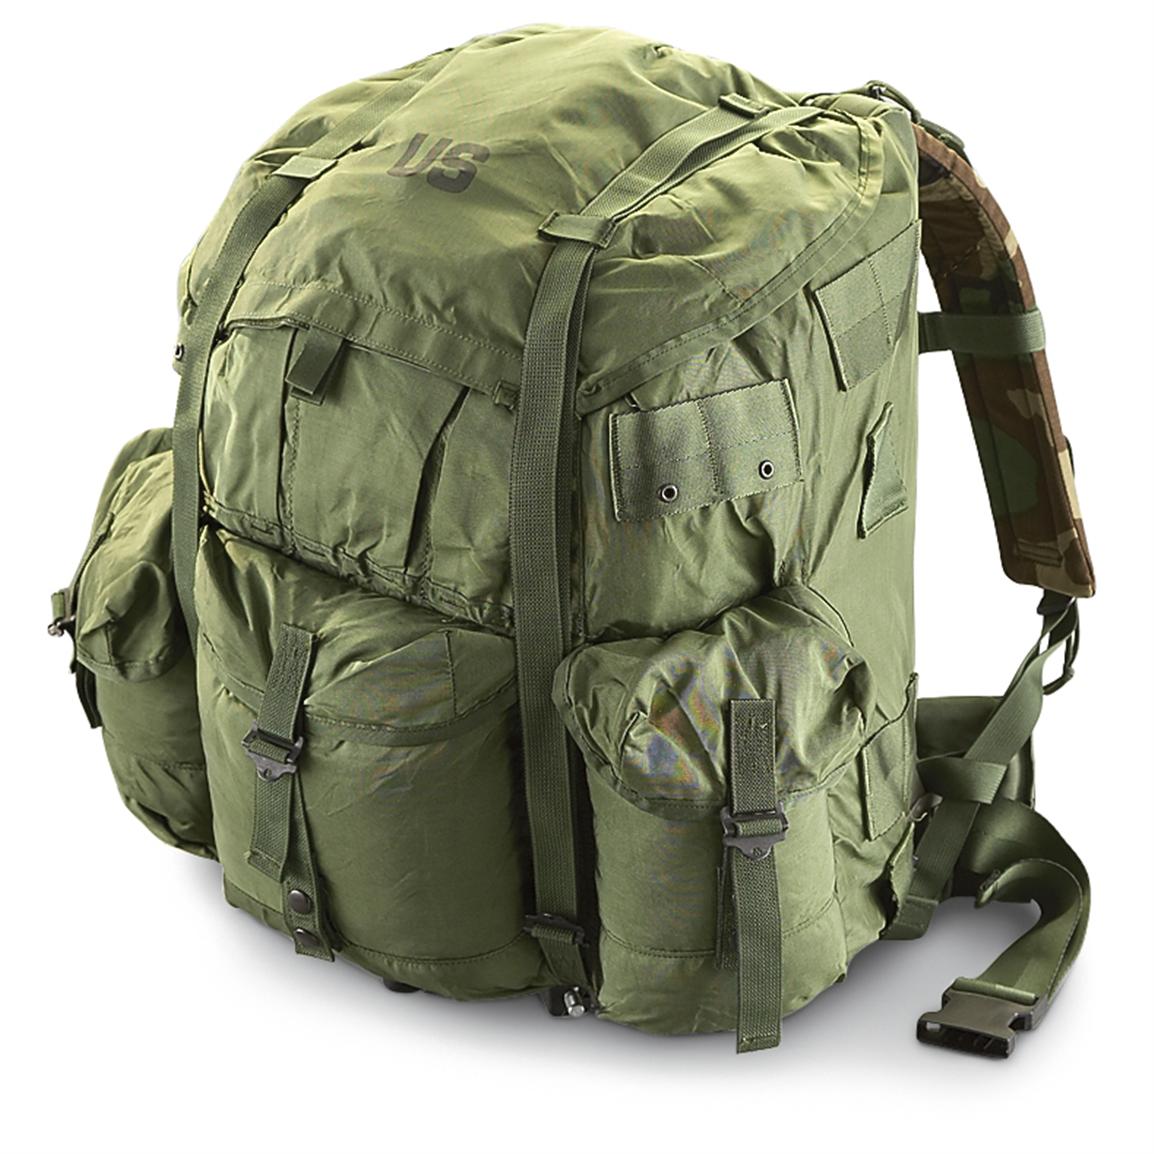 New U.S. Military Large A.L.I.C.E. Pack with Metal Frame, Camo - 167398 ...